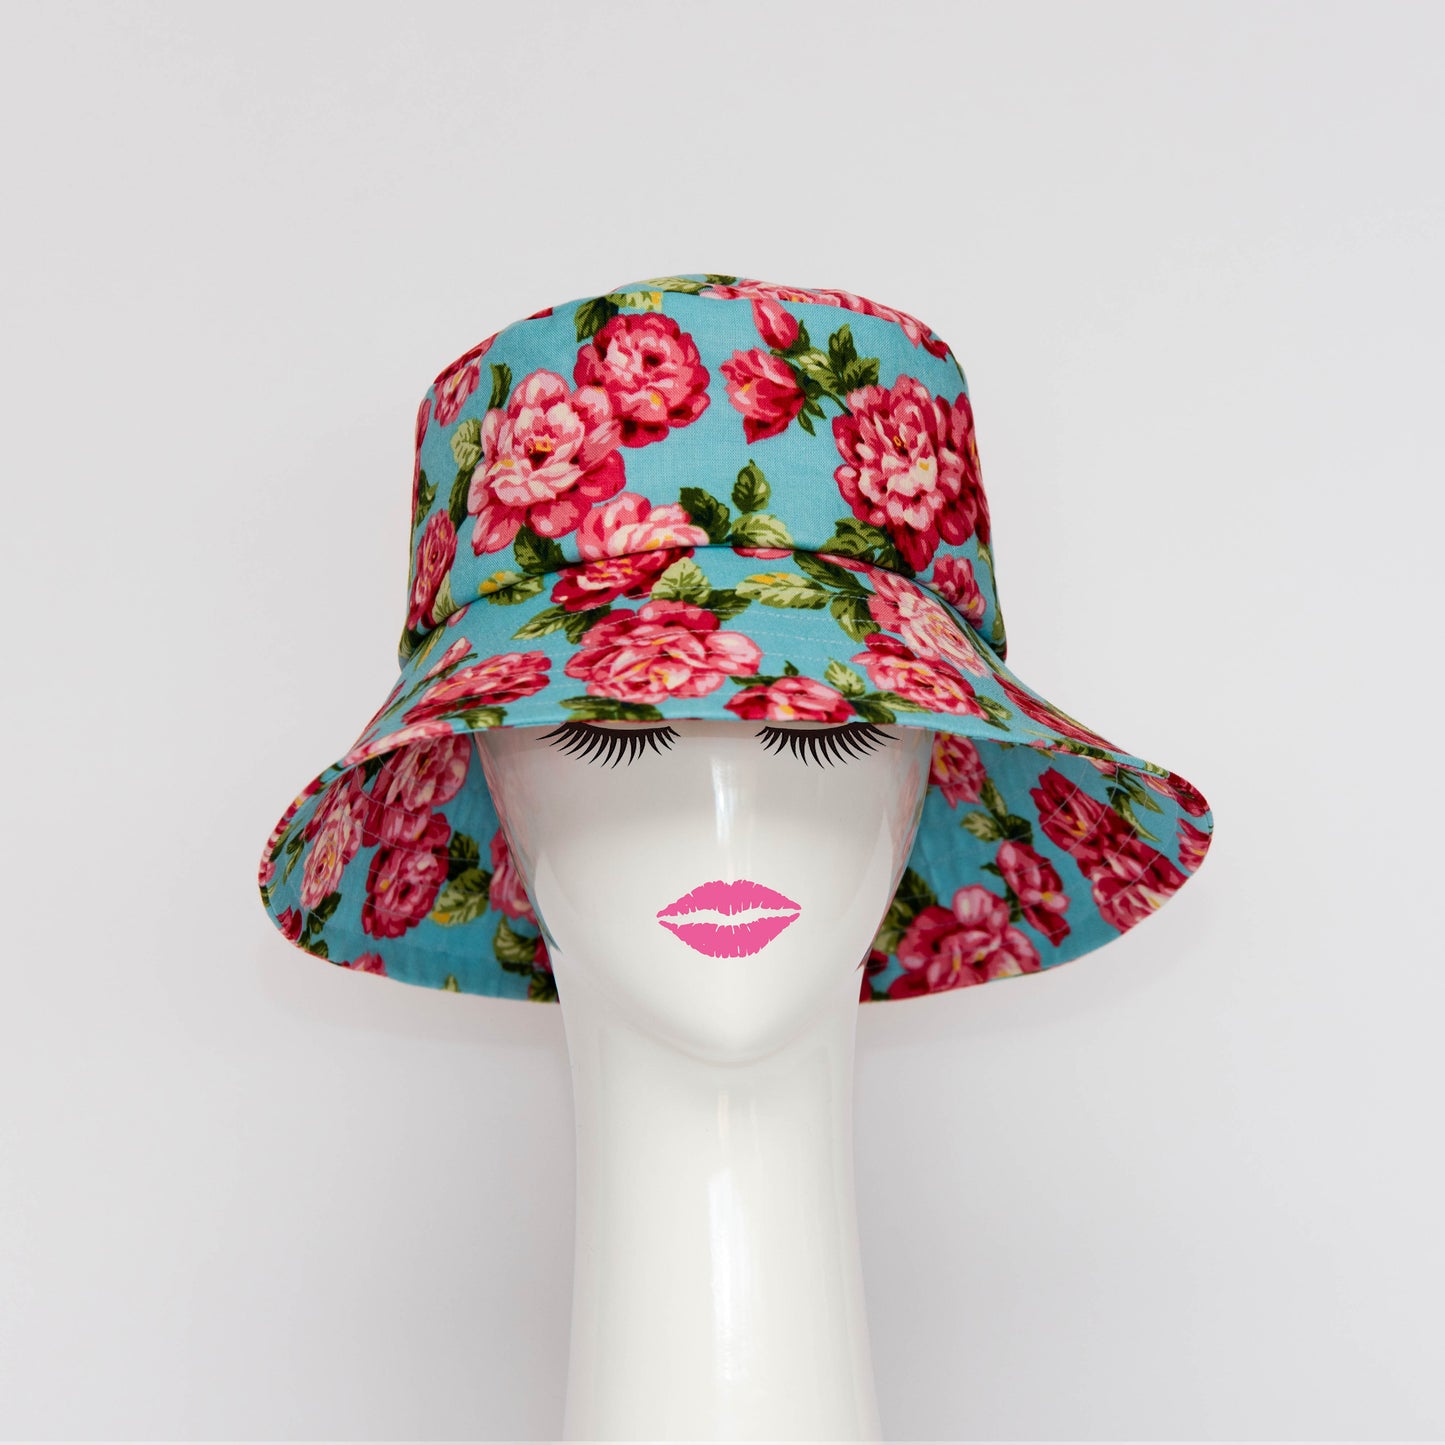 The Appin Bucket Hat in floral has a square shape crown with tip and side band.  The flared brim is 8cm wide to protect you from the sun.  Created by Melbourne based Lauren J Ritchie Millinery.